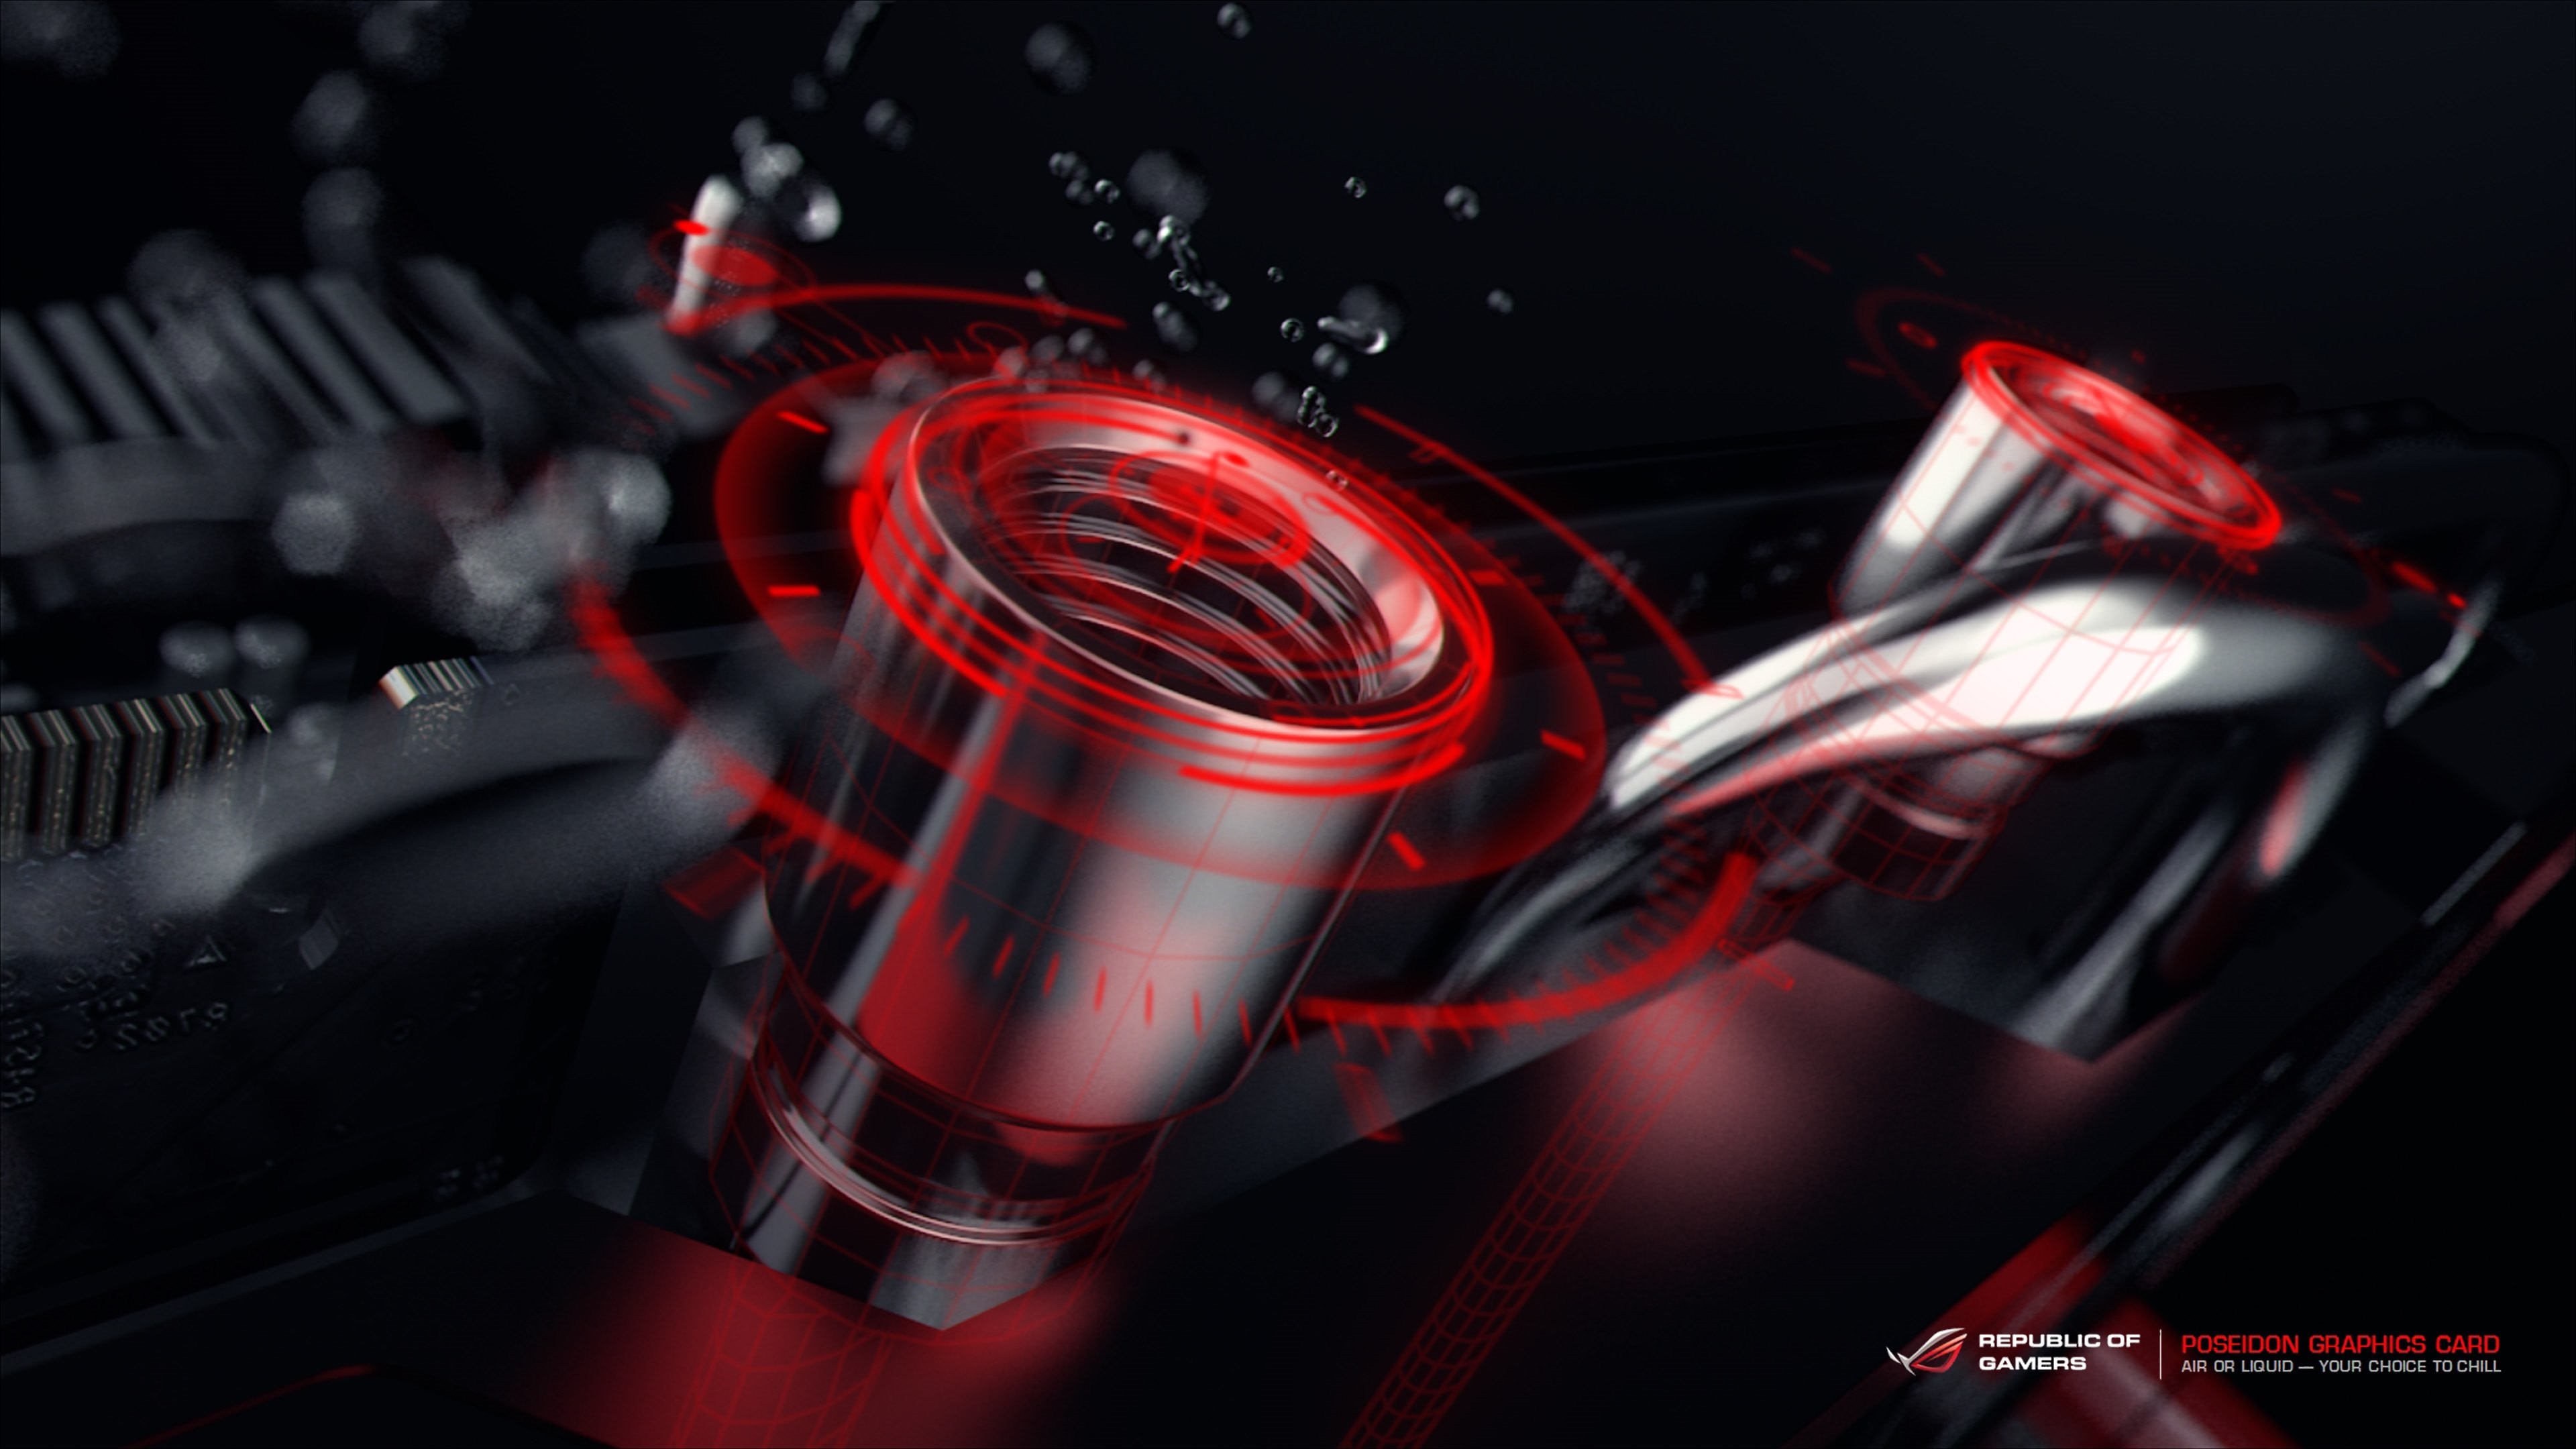 3840x2160 Asus Republic of Gamers Wallpapers :: HD Wallpapers